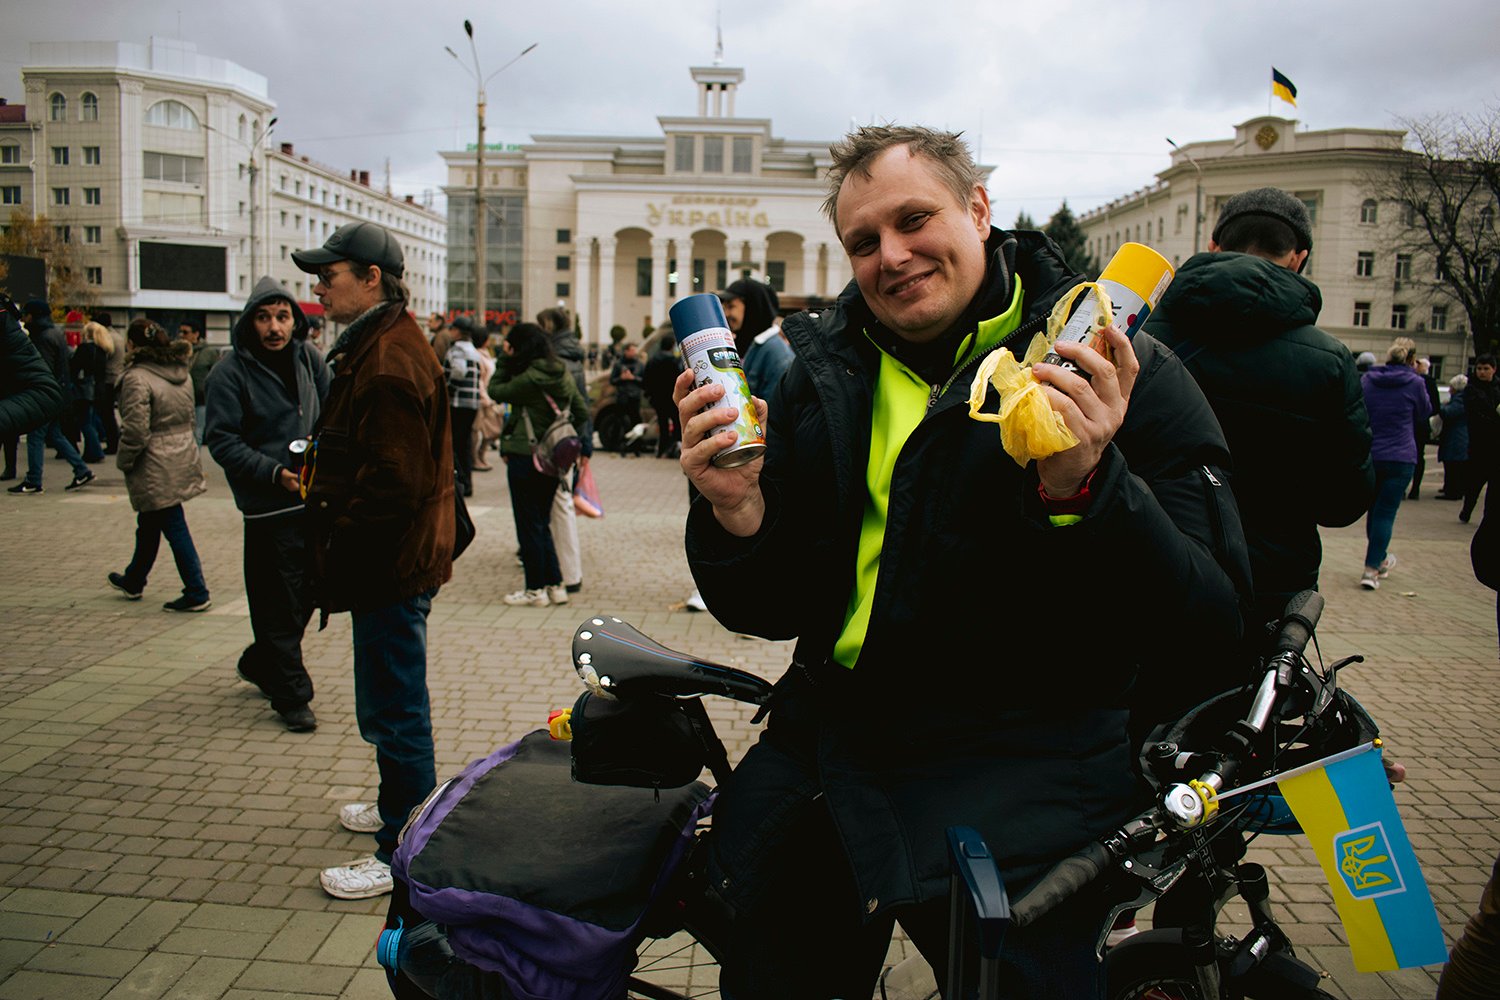 A pro-Ukrainian partisan holds up blue and yellow spray paint.